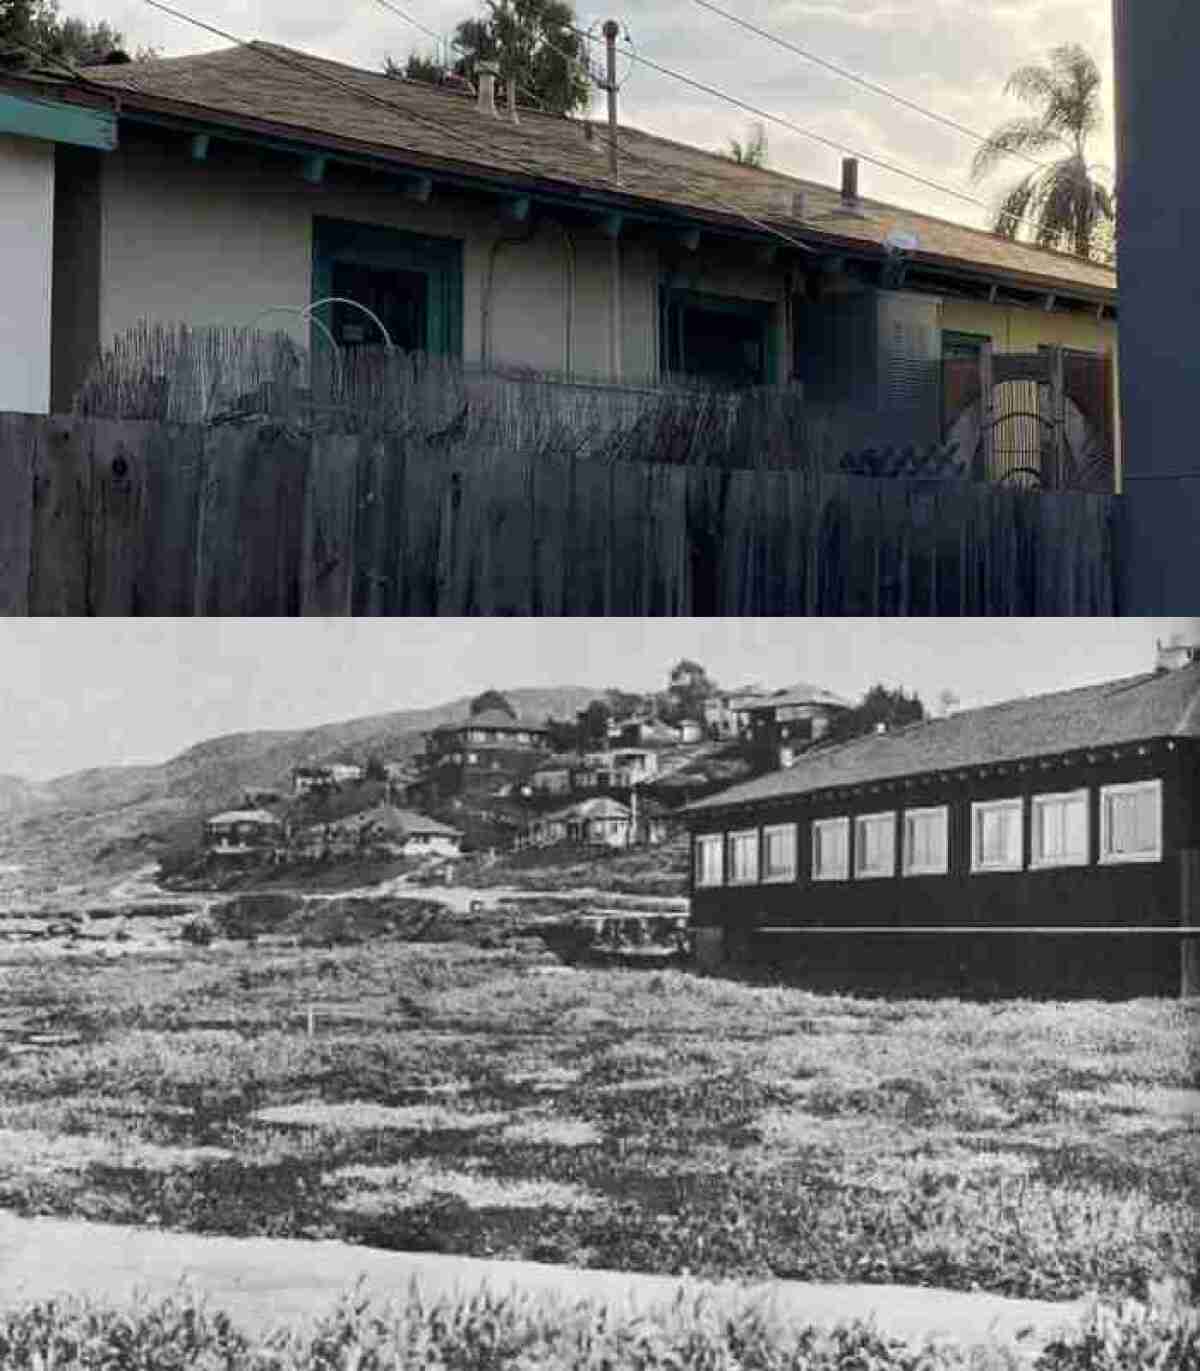 The Little Green Laboratory at La Jolla Cove (bottom) — located approximately where the La Jolla Cove Bridge Club is today — was a predecessor to the Scripps Institution of Oceanography and housed La Jolla’s greatest tourist attraction of 1905. Could the structure on top be how it appears today?